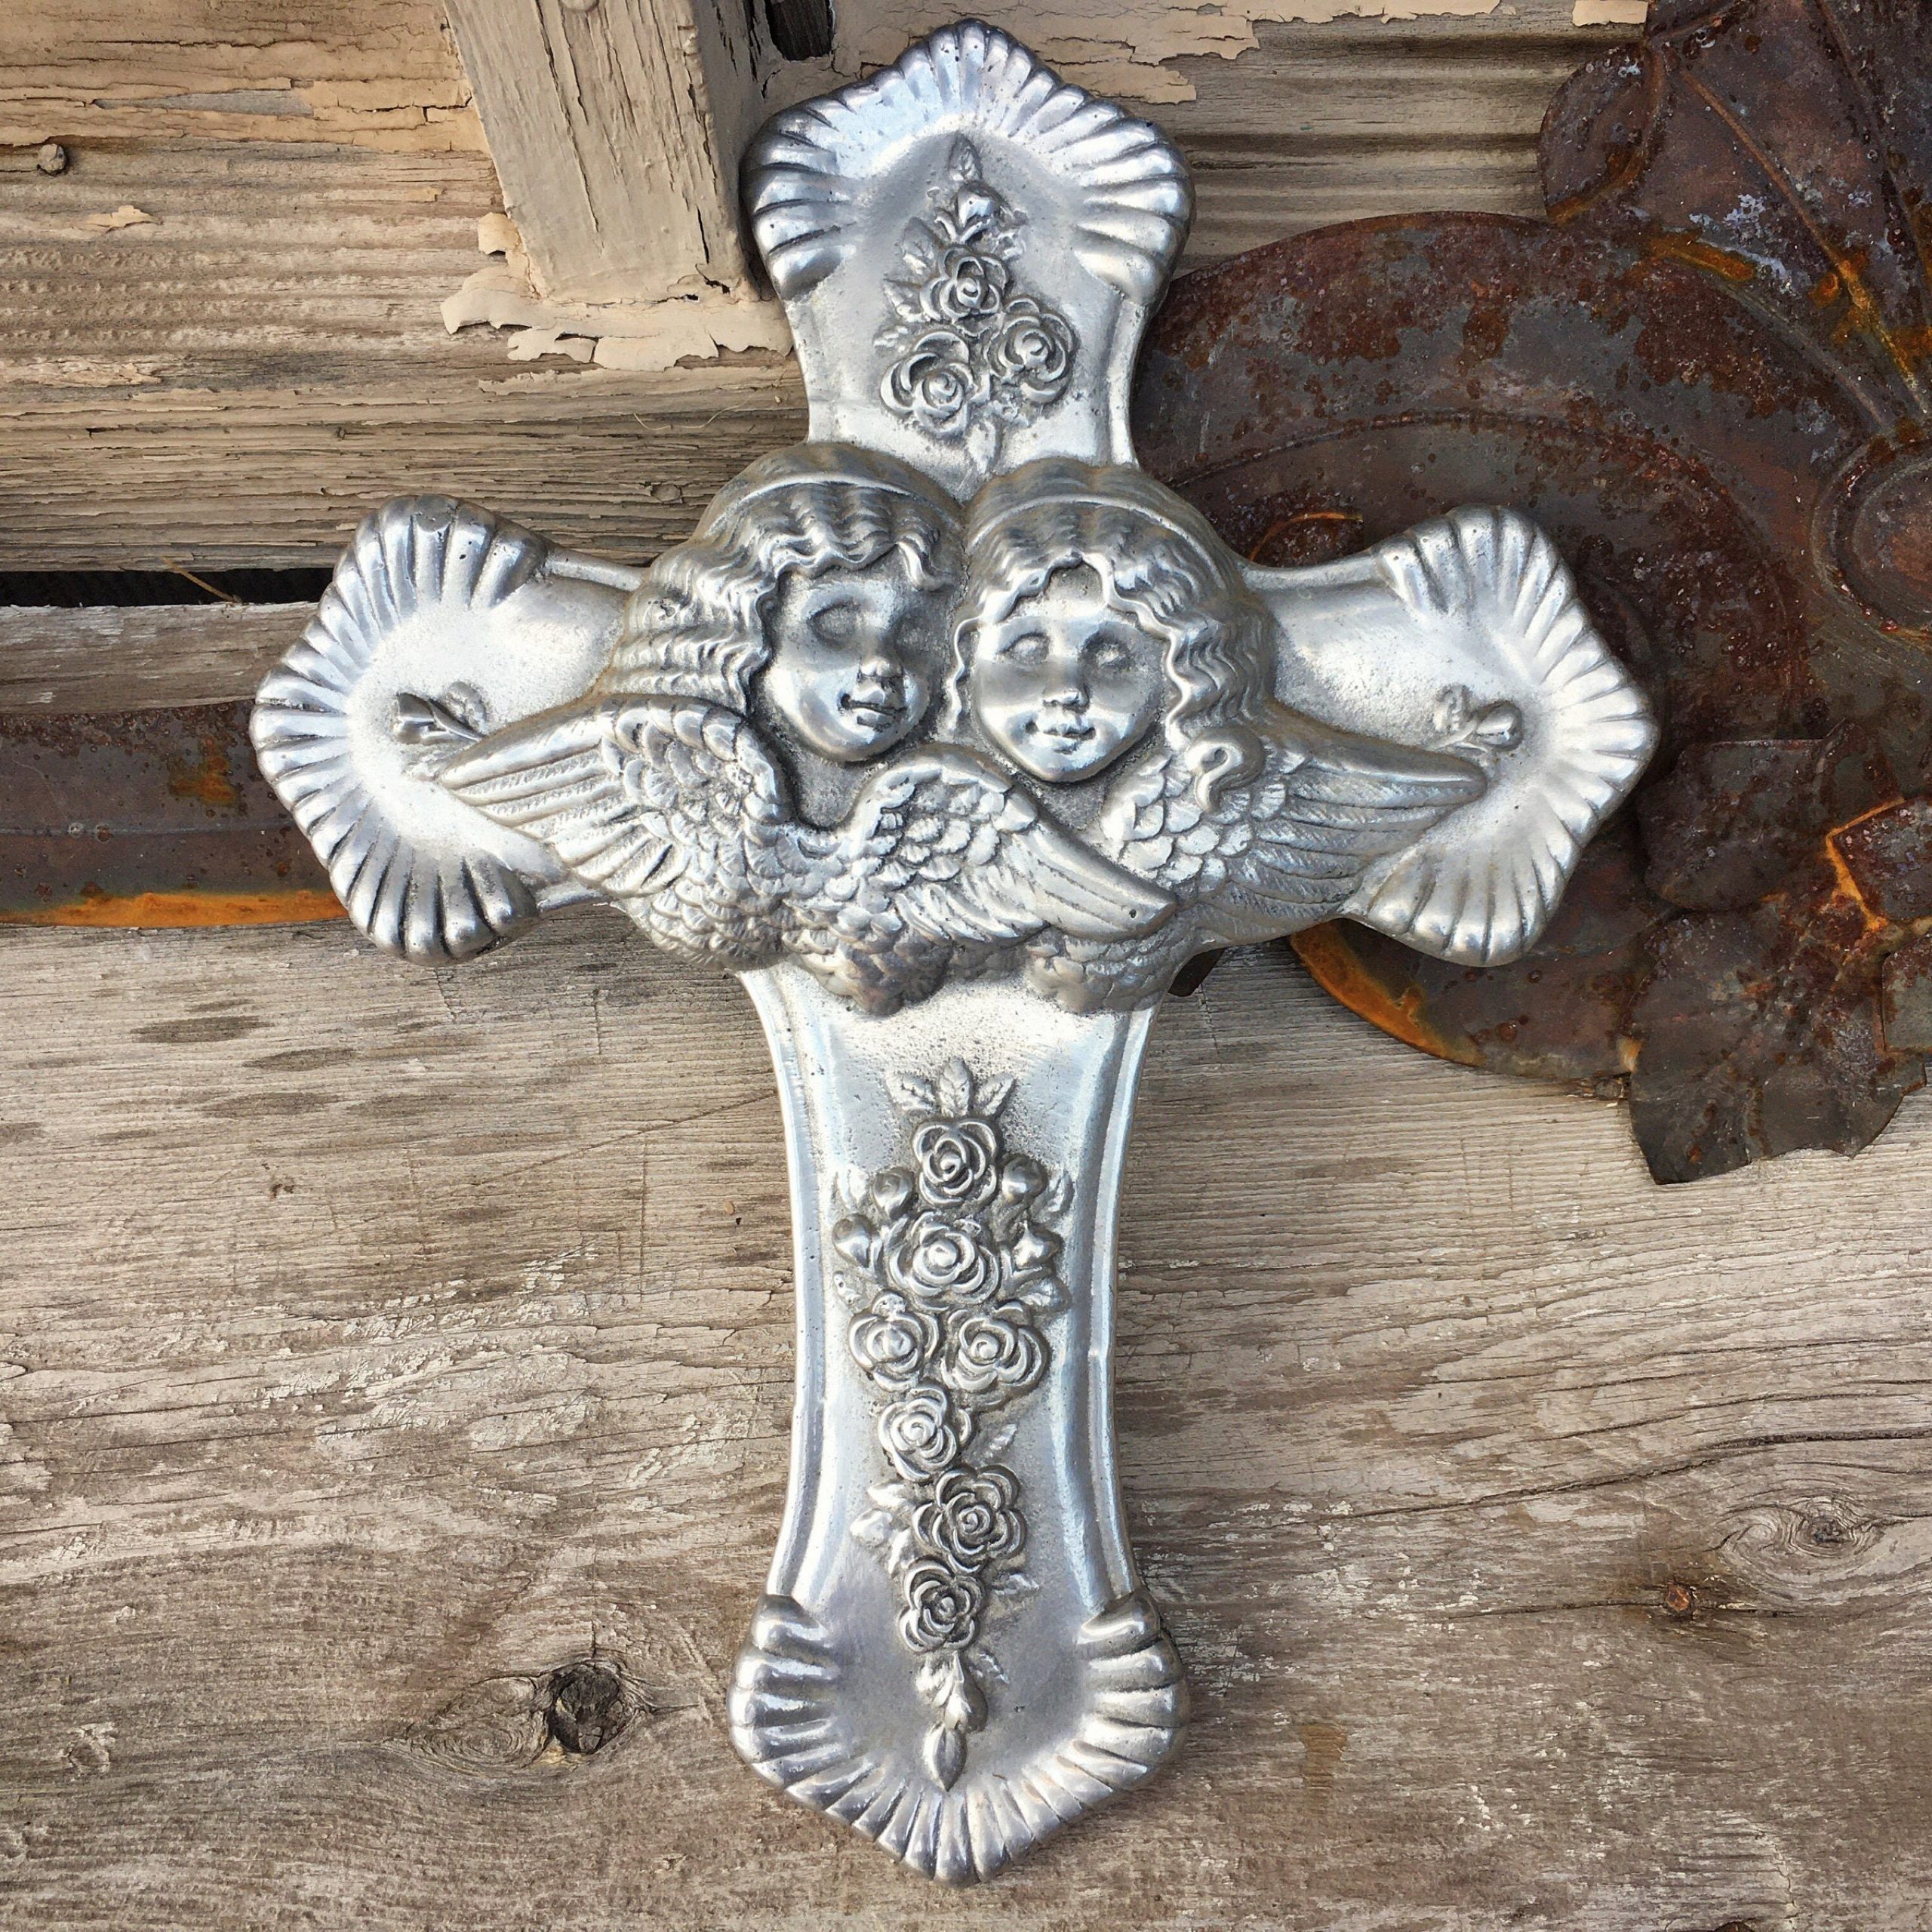 Pewter Metal Wall Art Inside Most Recently Released Pewter Metal Wall Cross With Winged Angels, Mexican Rustic Home Decor (View 14 of 15)